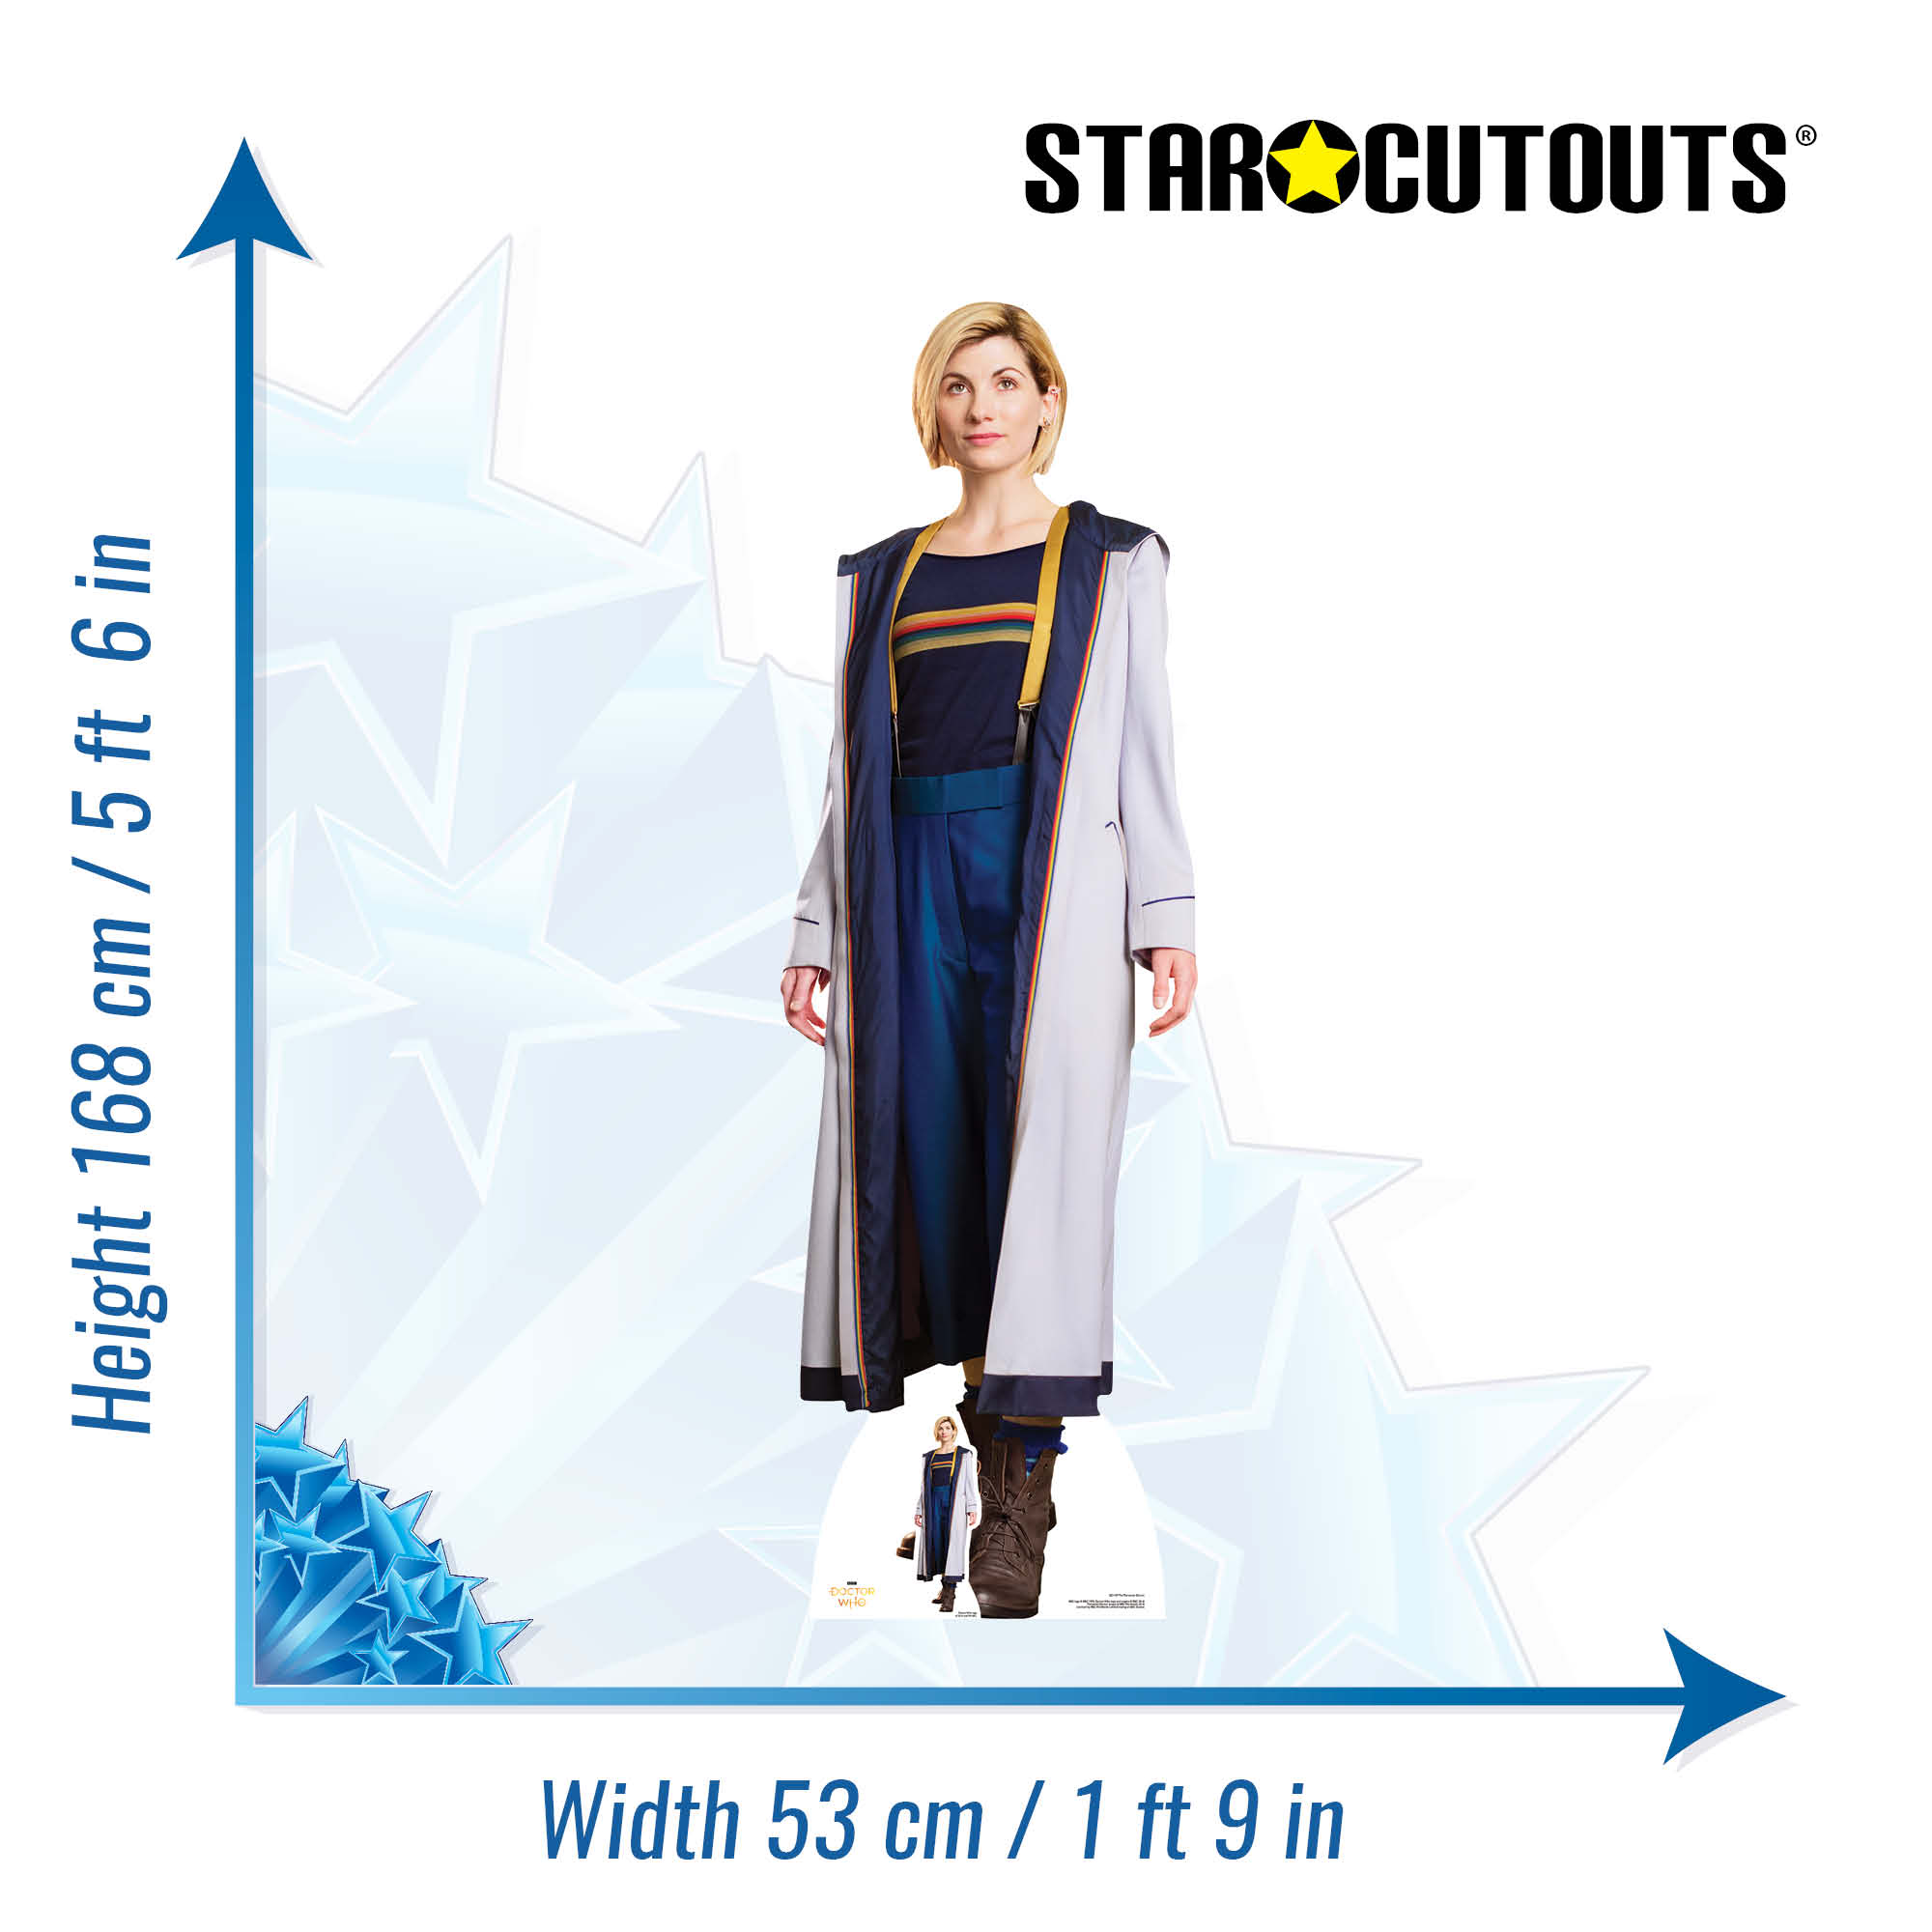 Doctor Who 13th Doctor Jodie Whittaker Coat | Celebrity Jackets